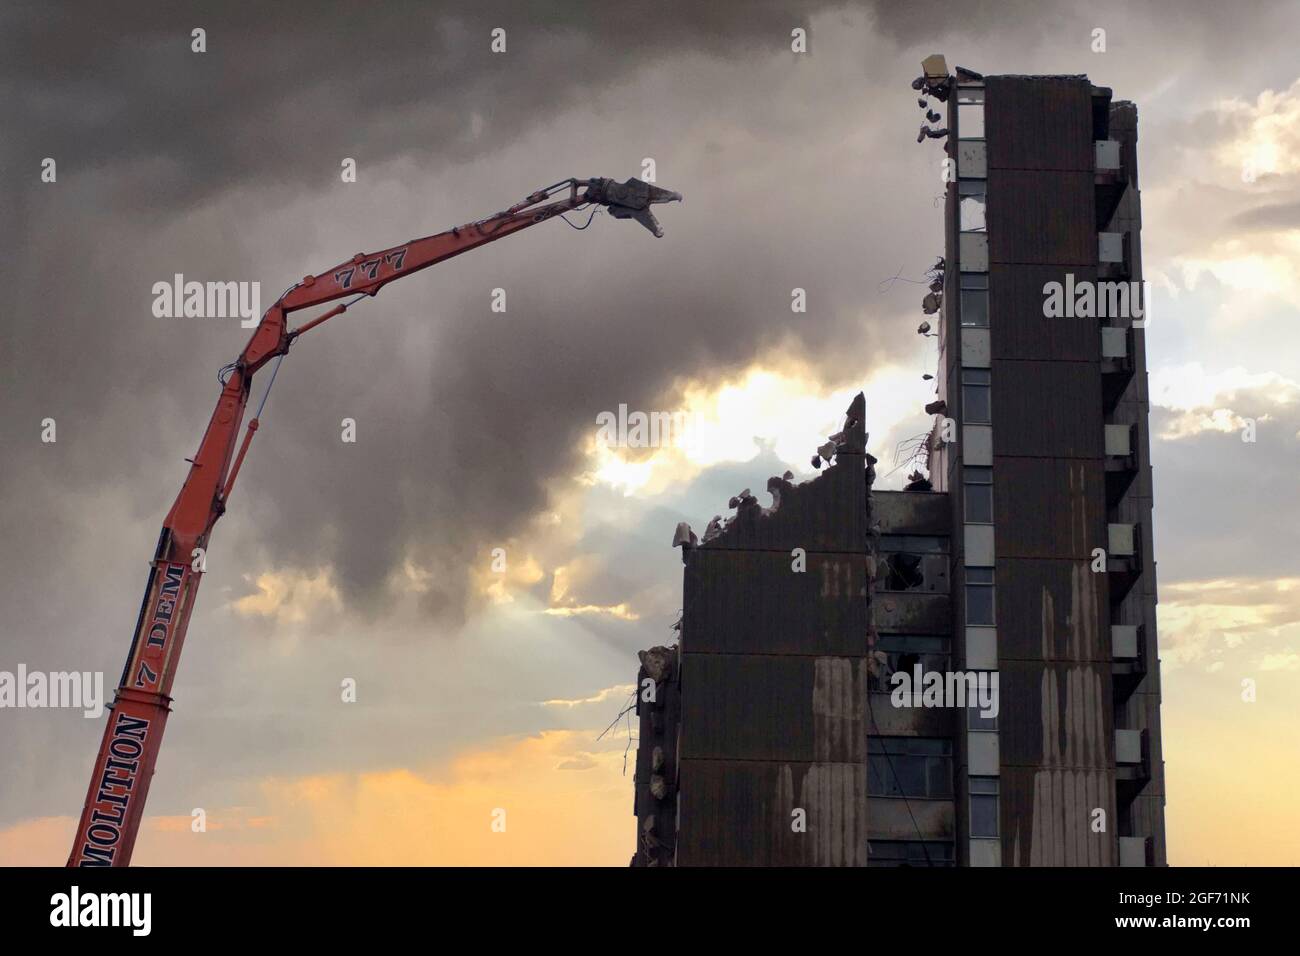 Demolition of tower block in Woodford Essex, using crane with boom and nibbler. Sky has been digitally manipulated for dramatic effect Stock Photo